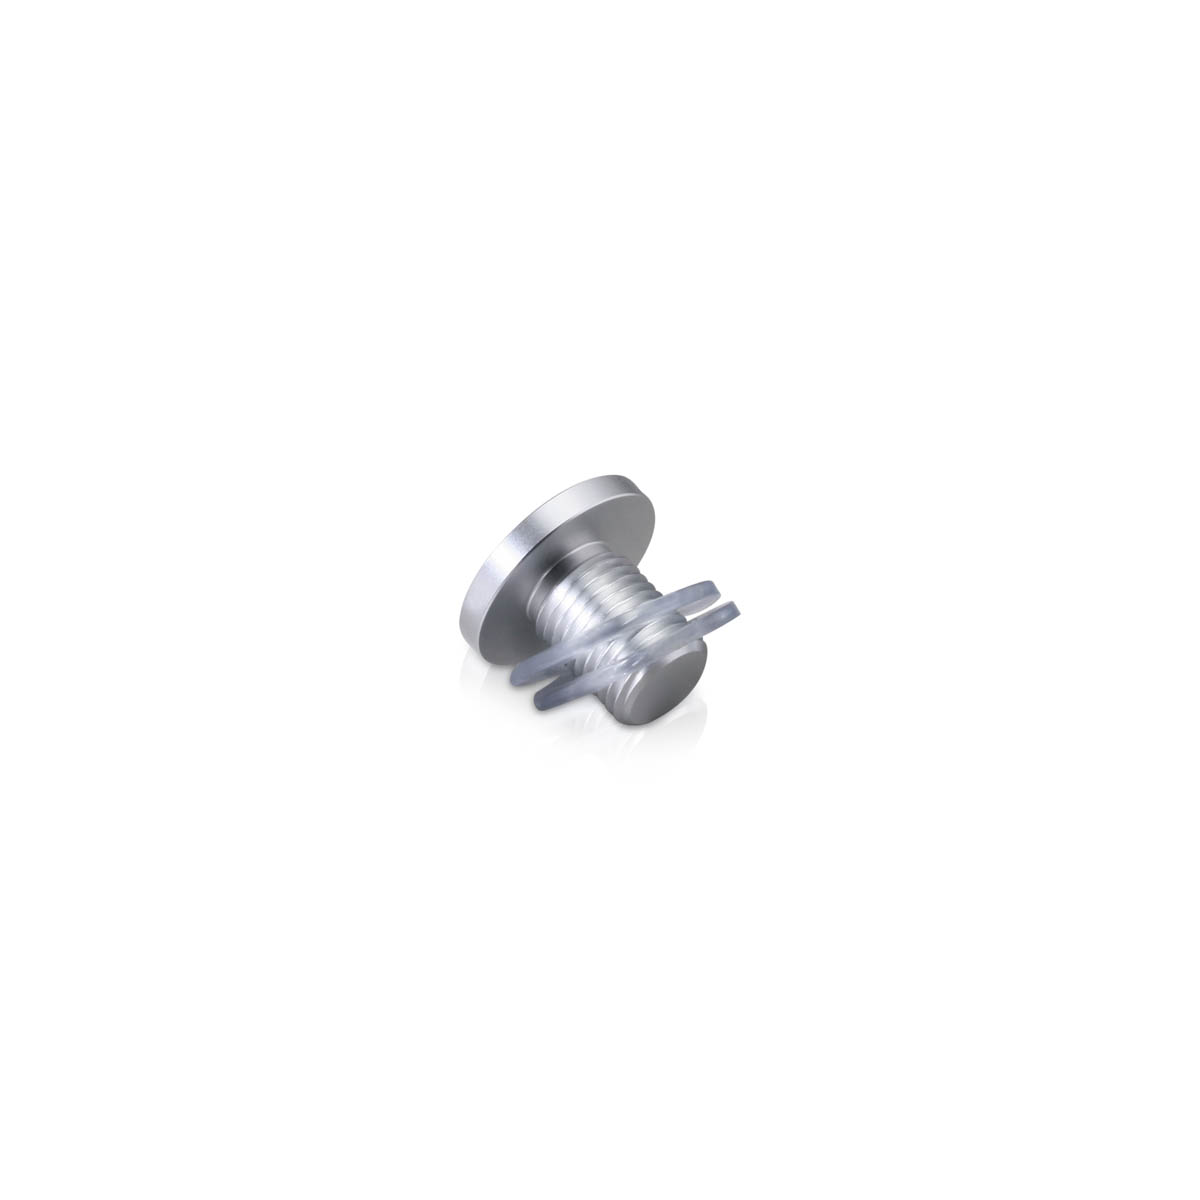 AL19-12A Head replacement for Mbs-Standoffs 3/4'' Diameter x 1/2'' Barrel Length, Aluminum Clear Anodized Finish Standoffs (Includes 2 Silicone Washers).